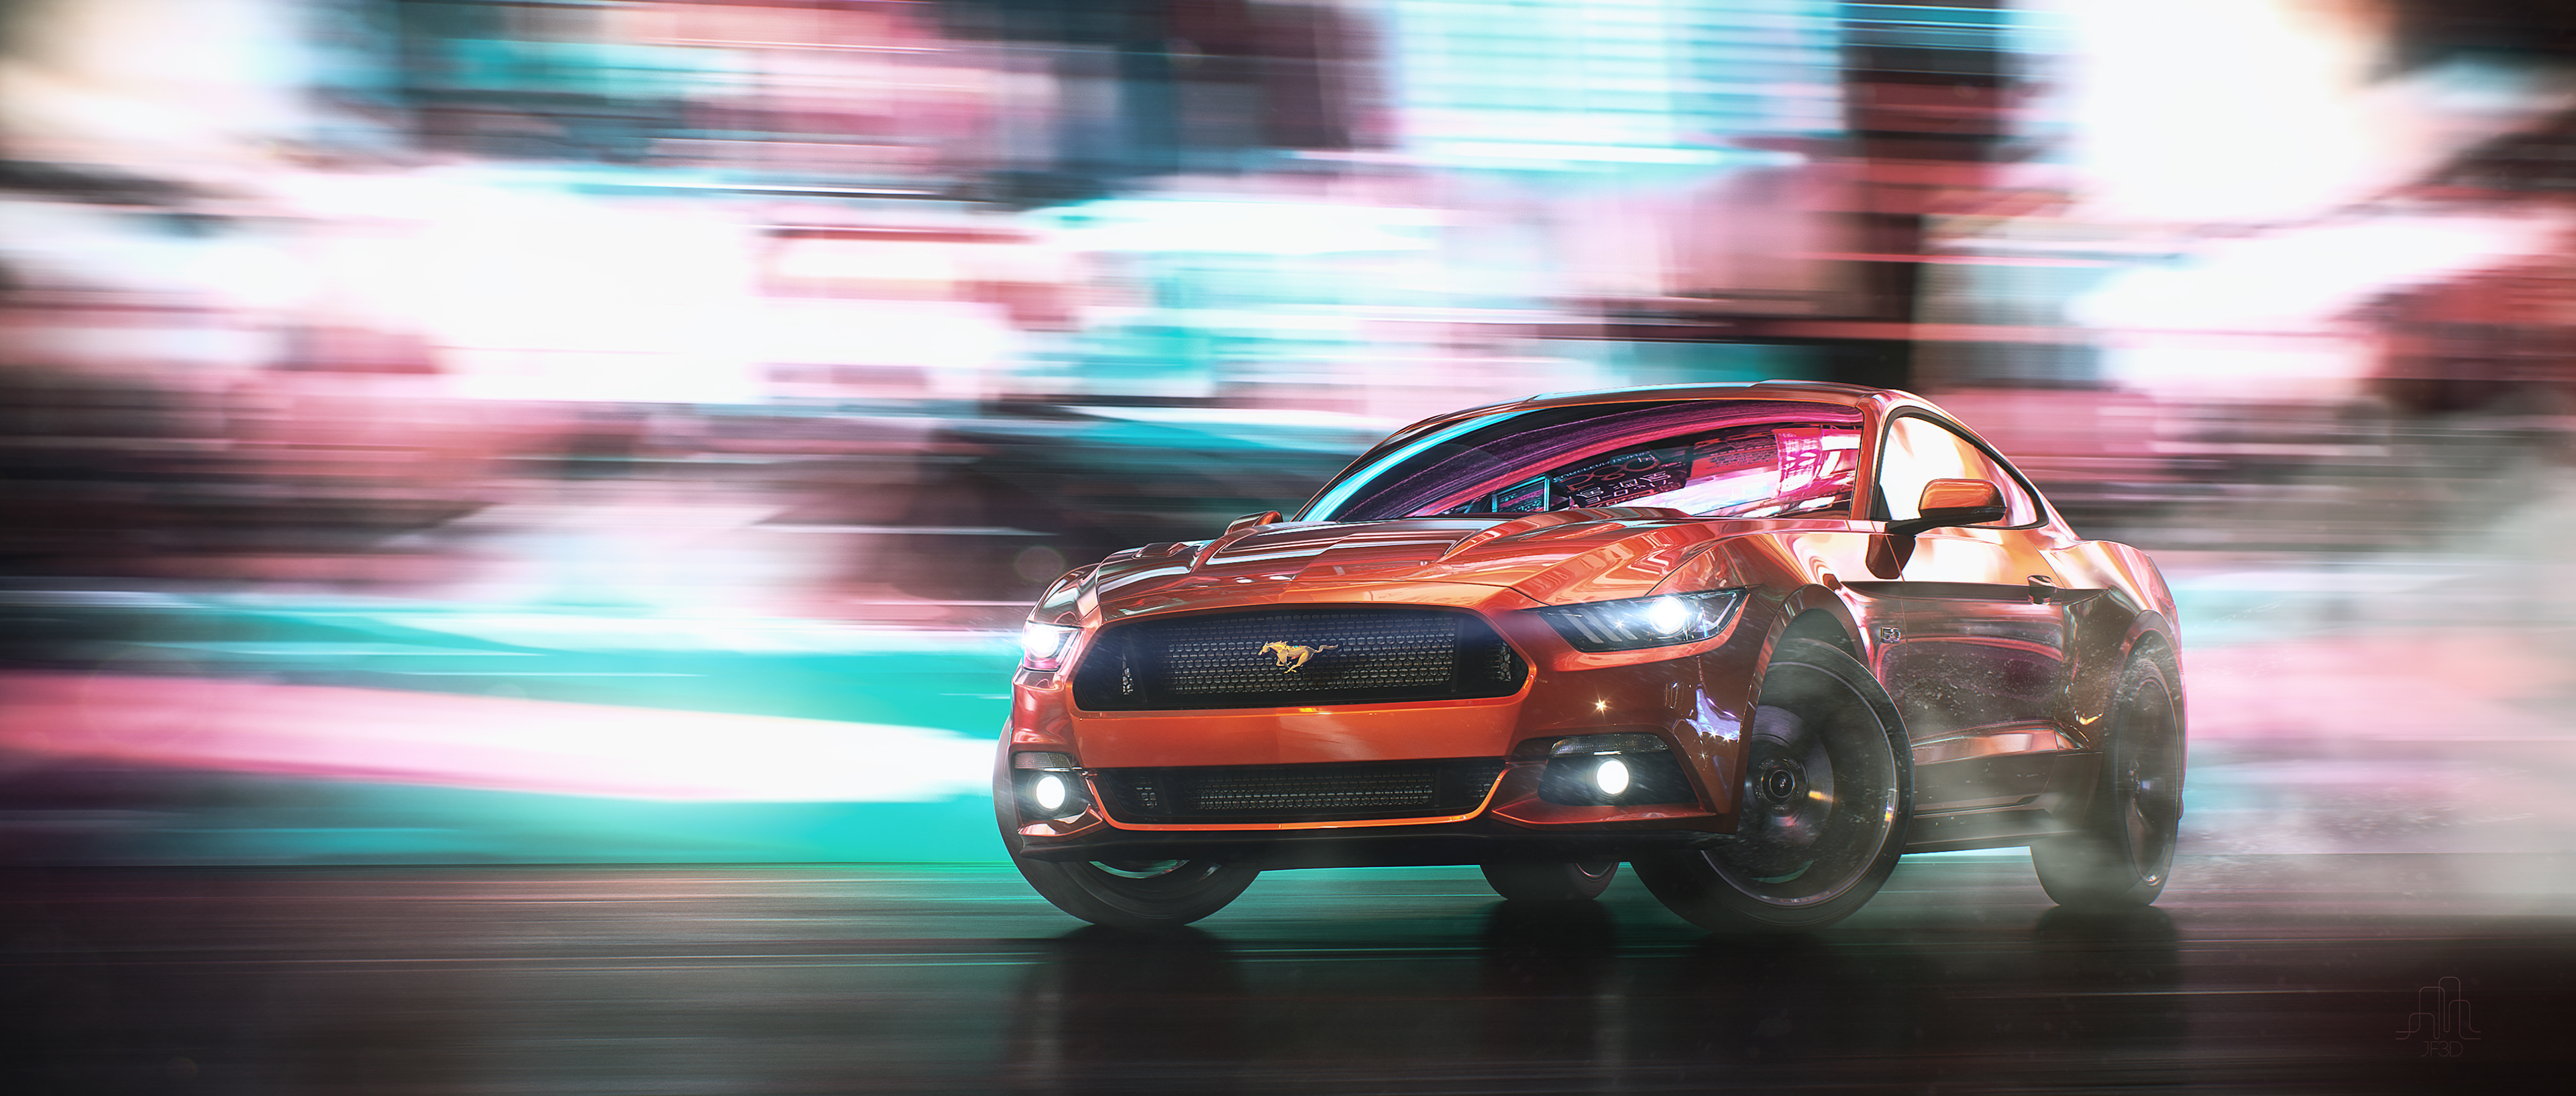 Wallpapers Ford Mustang drift Ford on the desktop